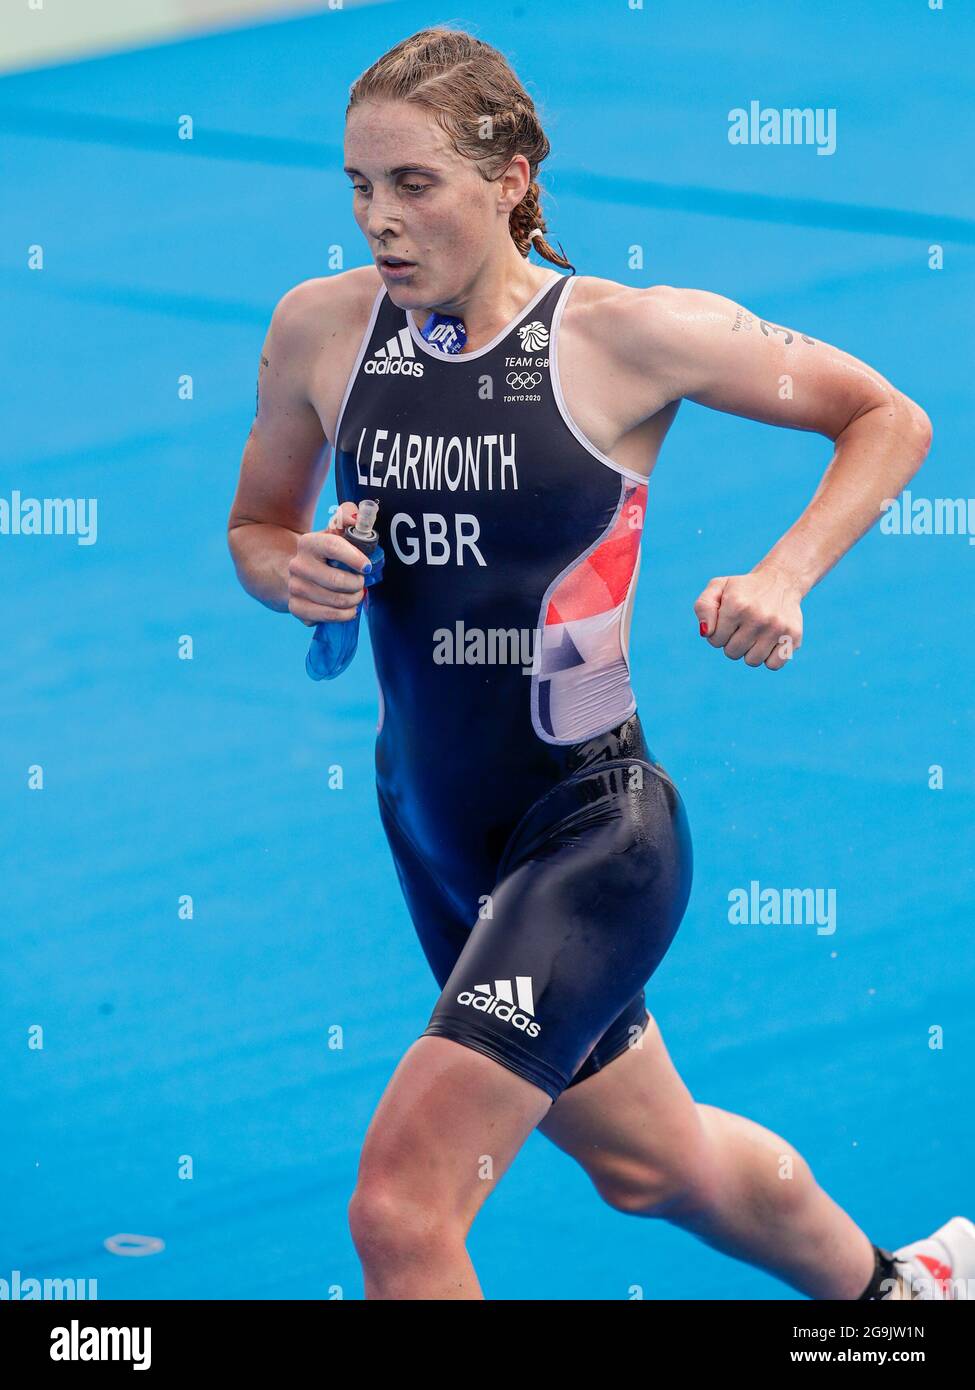 Tokyo, Japan. 27th July, 2021. TOKYO, JAPAN - JULY 27: Jessica Learmonth of Great Britain competing on Women's Individual during the Tokyo 2020 Olympic Games at the Odaiba Marine Park on July 27, 2021 in Tokyo, Japan (Photo by Pim Waslander/Orange Pictures) NOCNSF Credit: Orange Pics BV/Alamy Live News Stock Photo